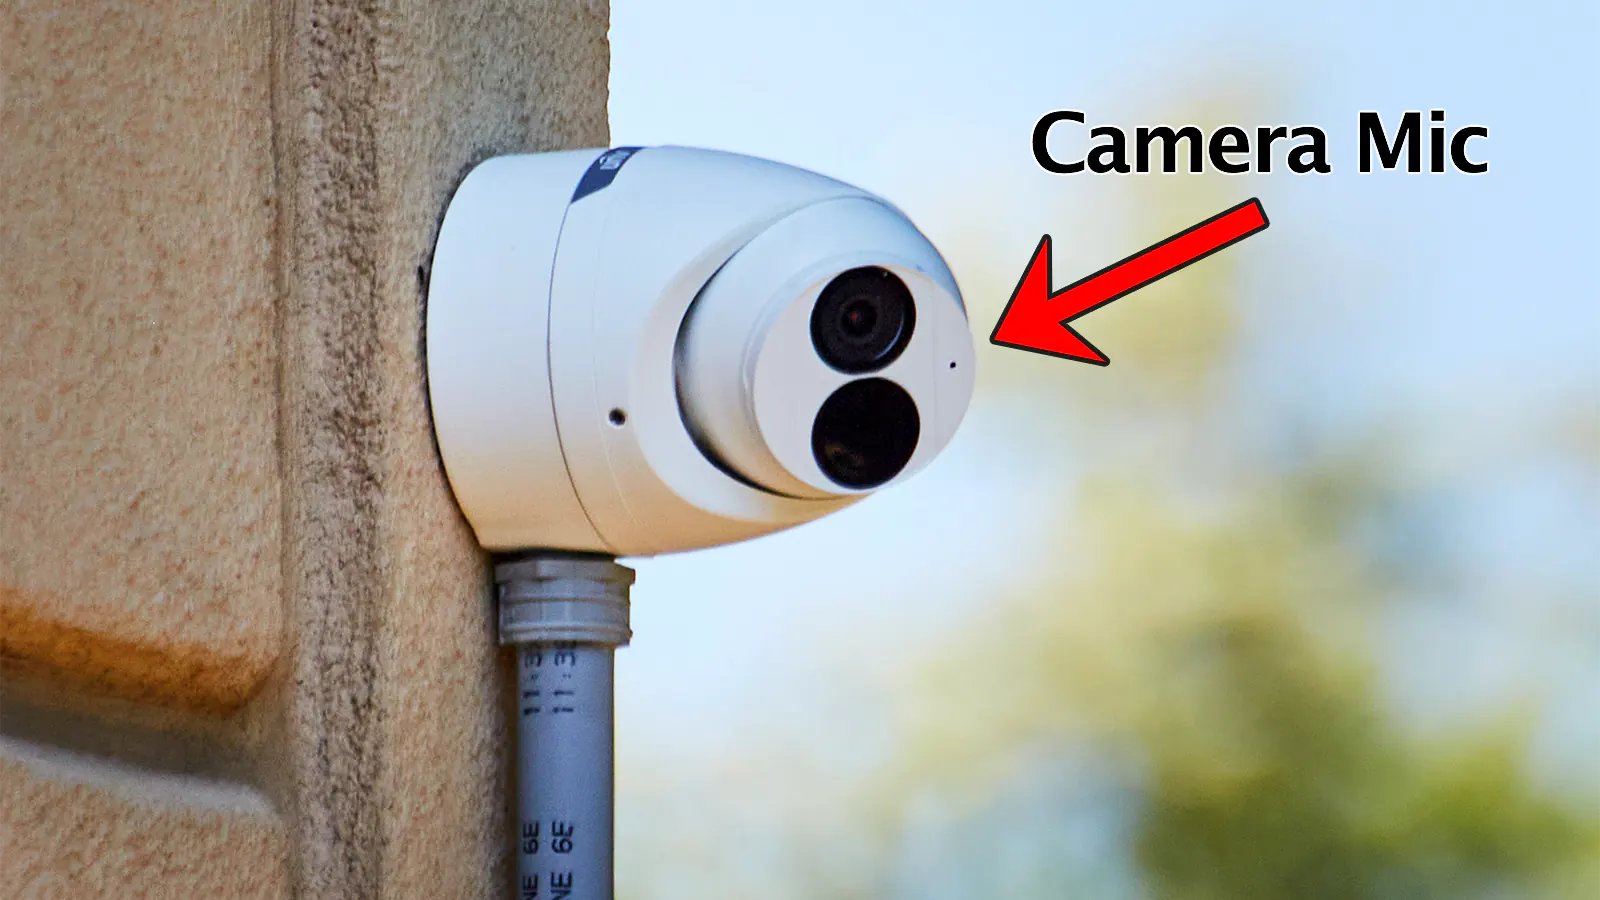 A security camera mounted outside on a brick wall. A conduit pipe is installed at the base of the camera.